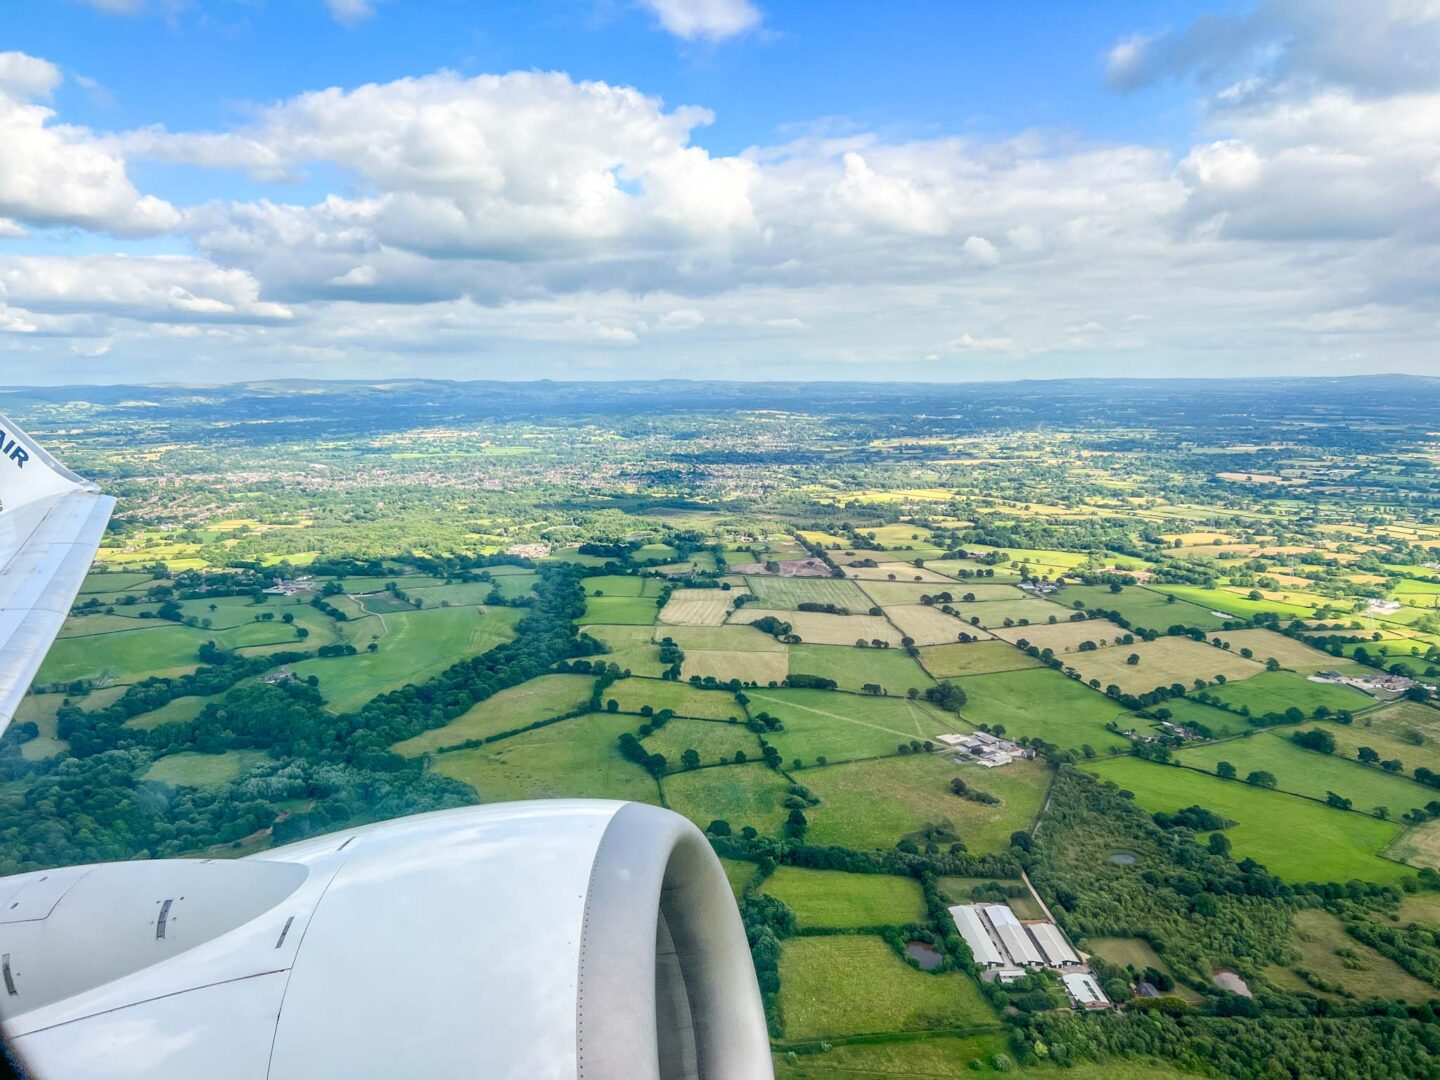 Things to do near Manchester Airport, Plane views over Manchester Airport